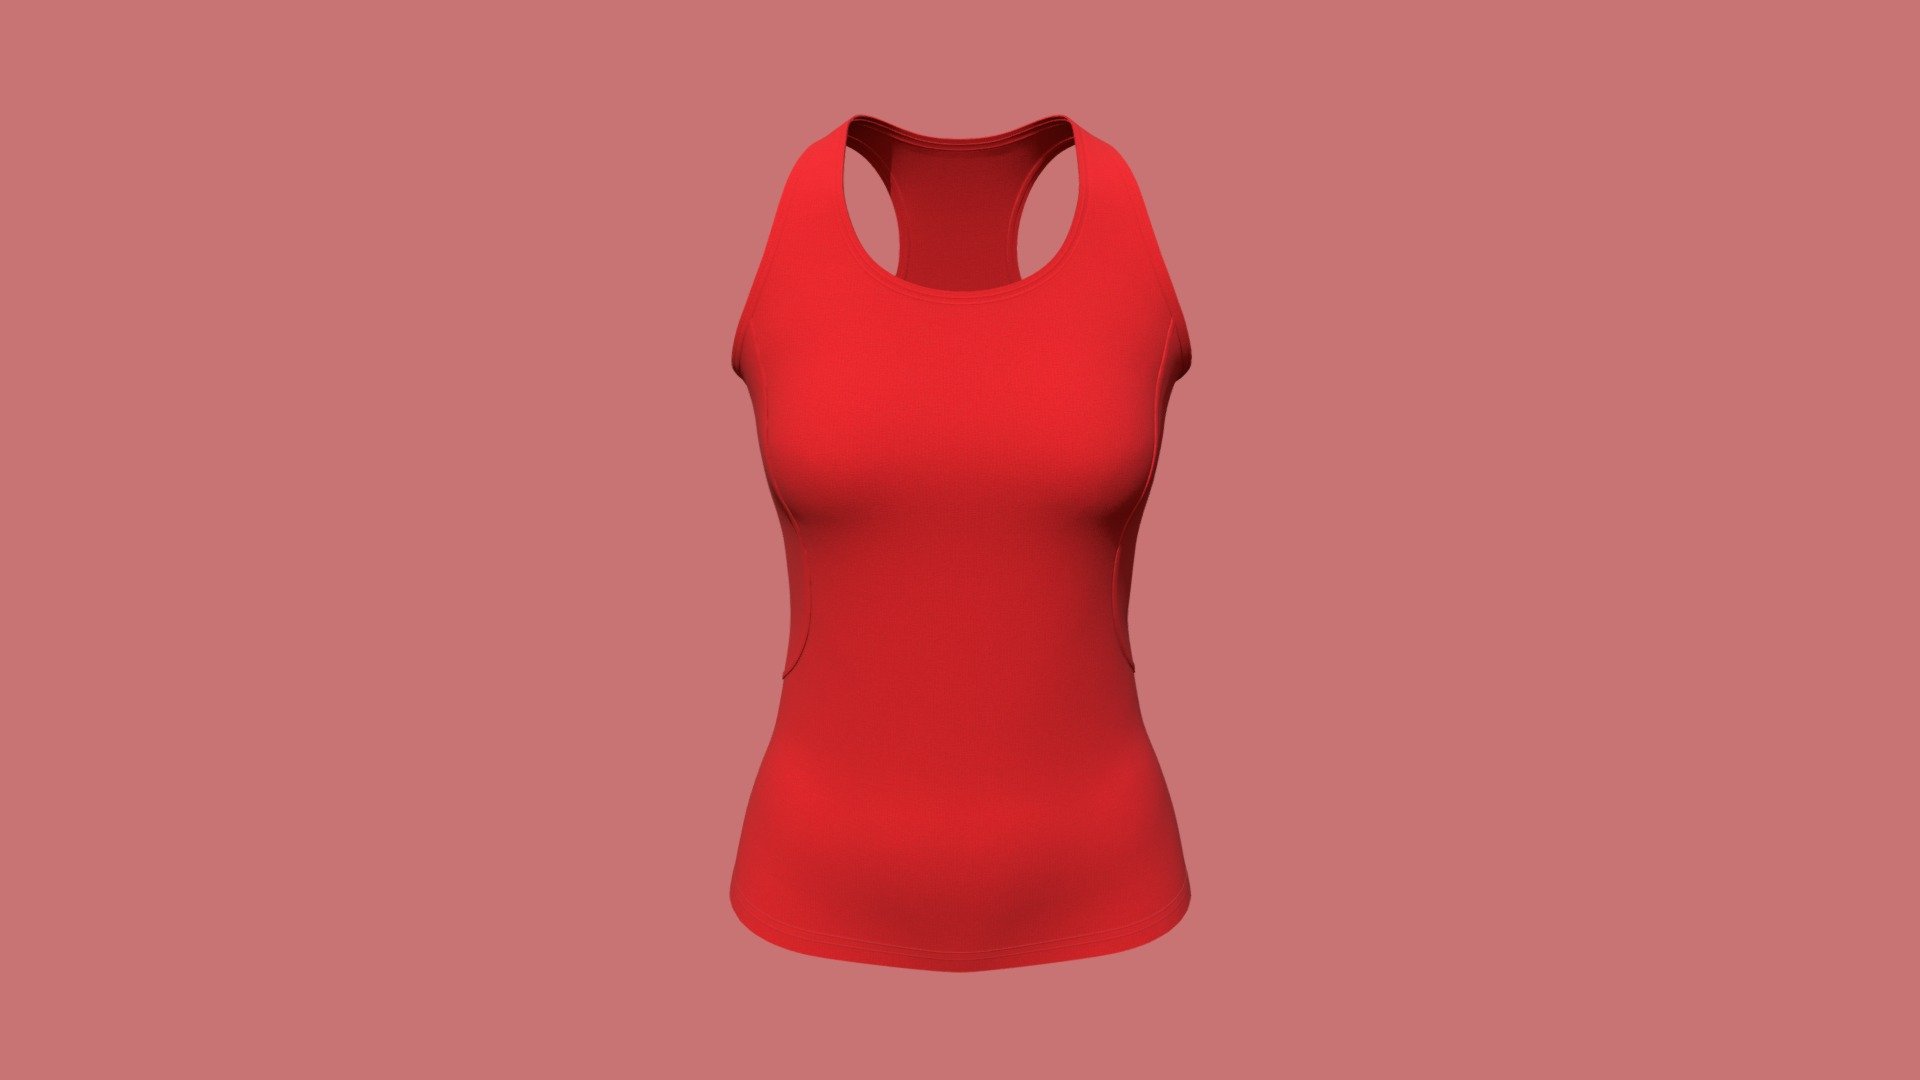 Cloth Title = Sporty Tank top for women  

SKU = DG100112 

Category = Women 

Product Type = Tank Top 

Cloth Length = Regular 

Body Fit = Regular Fit 

Occasion = Sportswear  


Our Services:

3D Apparel Design.

OBJ,FBX,GLTF Making with High/Low Poly.

Fabric Digitalization.

Mockup making.

3D Teck Pack.

Pattern Making.

2D Illustration.

Cloth Animation and 360 Spin Video.


Contact us:- 

Email: info@digitalfashionwear.com 

Website: https://digitalfashionwear.com 

WhatsApp No: +8801759350445 


We designed all the types of cloth specially focused on product visualization, e-commerce, fitting, and production. 

We will design: 

T-shirts 

Polo shirts 

Hoodies 

Sweatshirt 

Jackets 

Shirts 

TankTops 

Trousers 

Bras 

Underwear 

Blazer 

Aprons 

Leggings 

and All Fashion items. 





Our goal is to make sure what we provide you, meets your demand 3d model